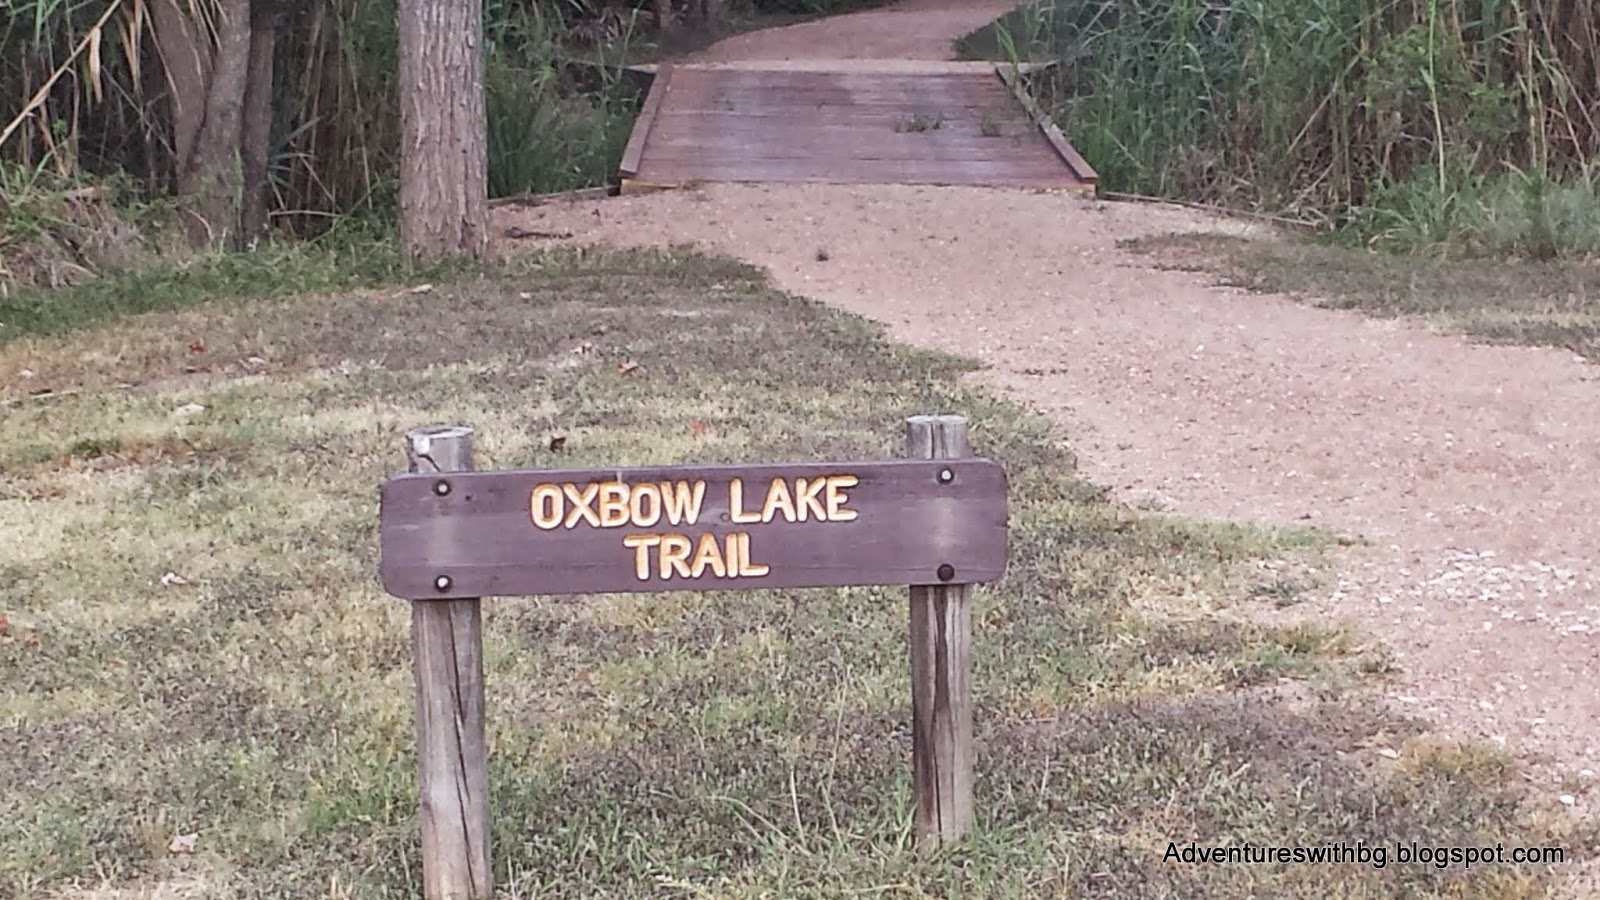 The Oxbow Lake Trailhead at Palmetto State Park